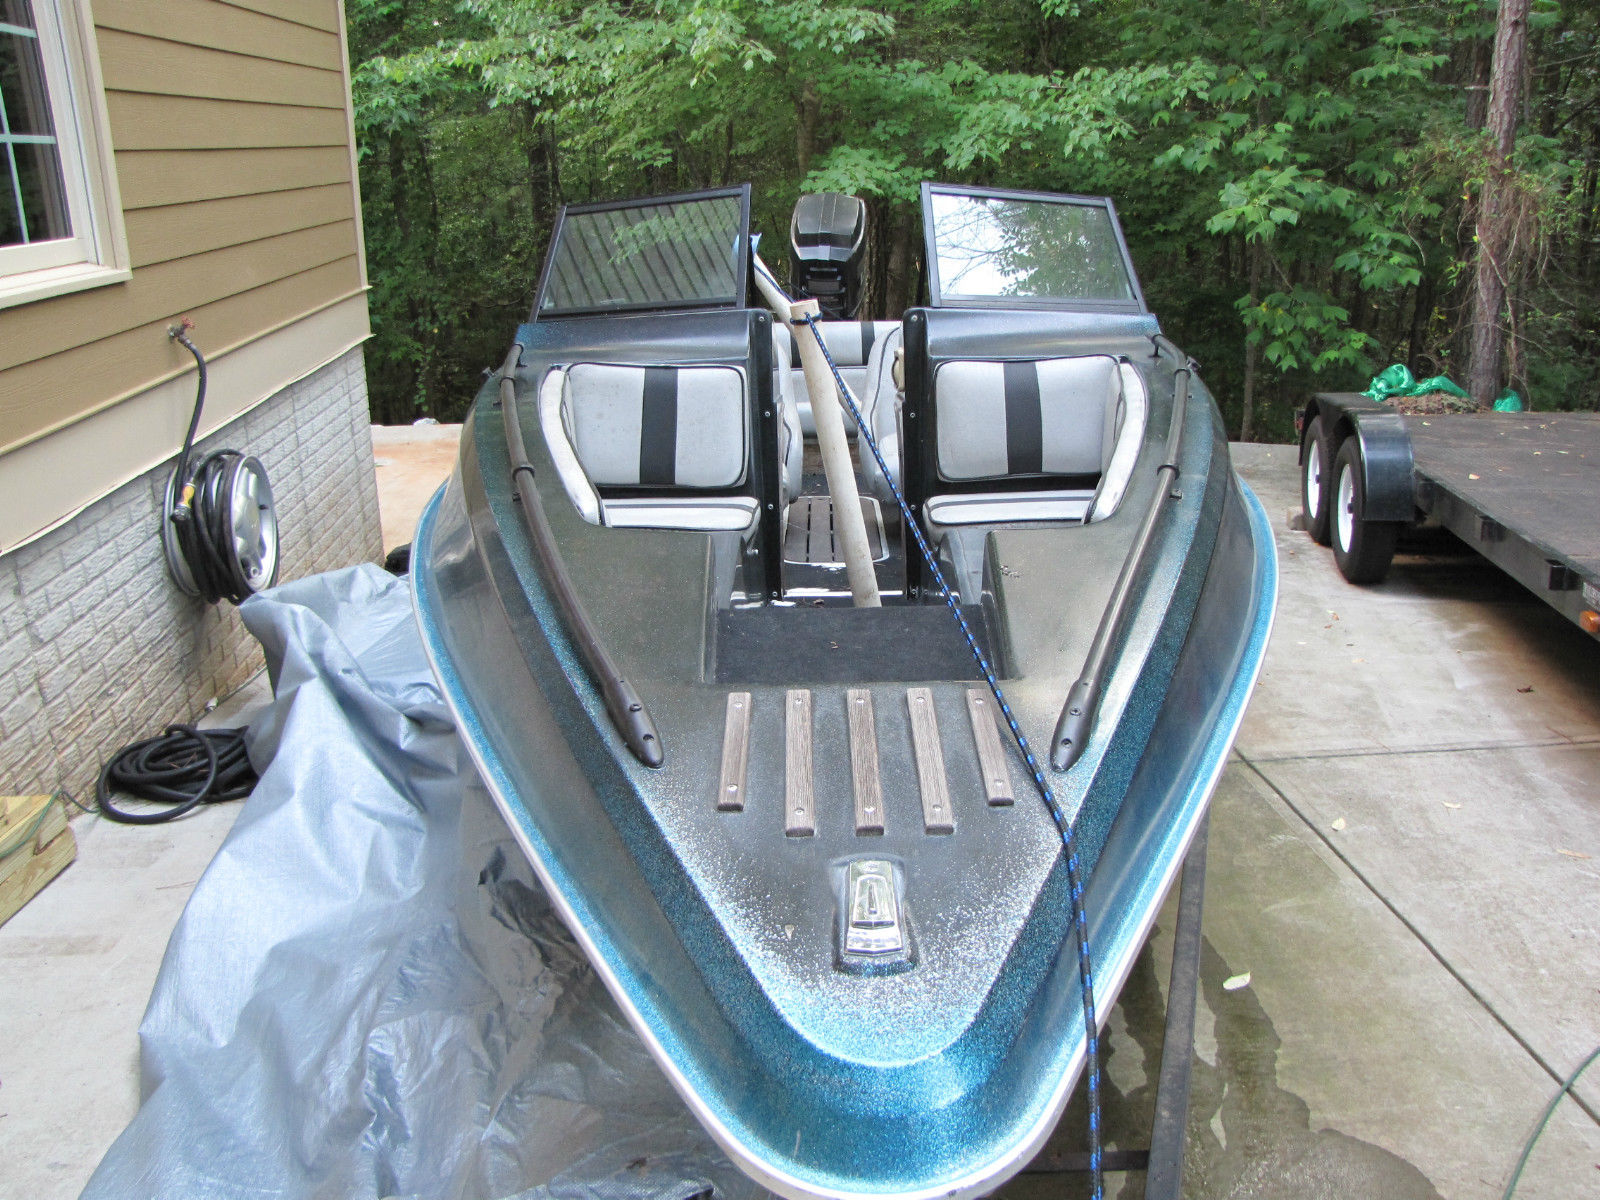 hydrostream voyager for sale